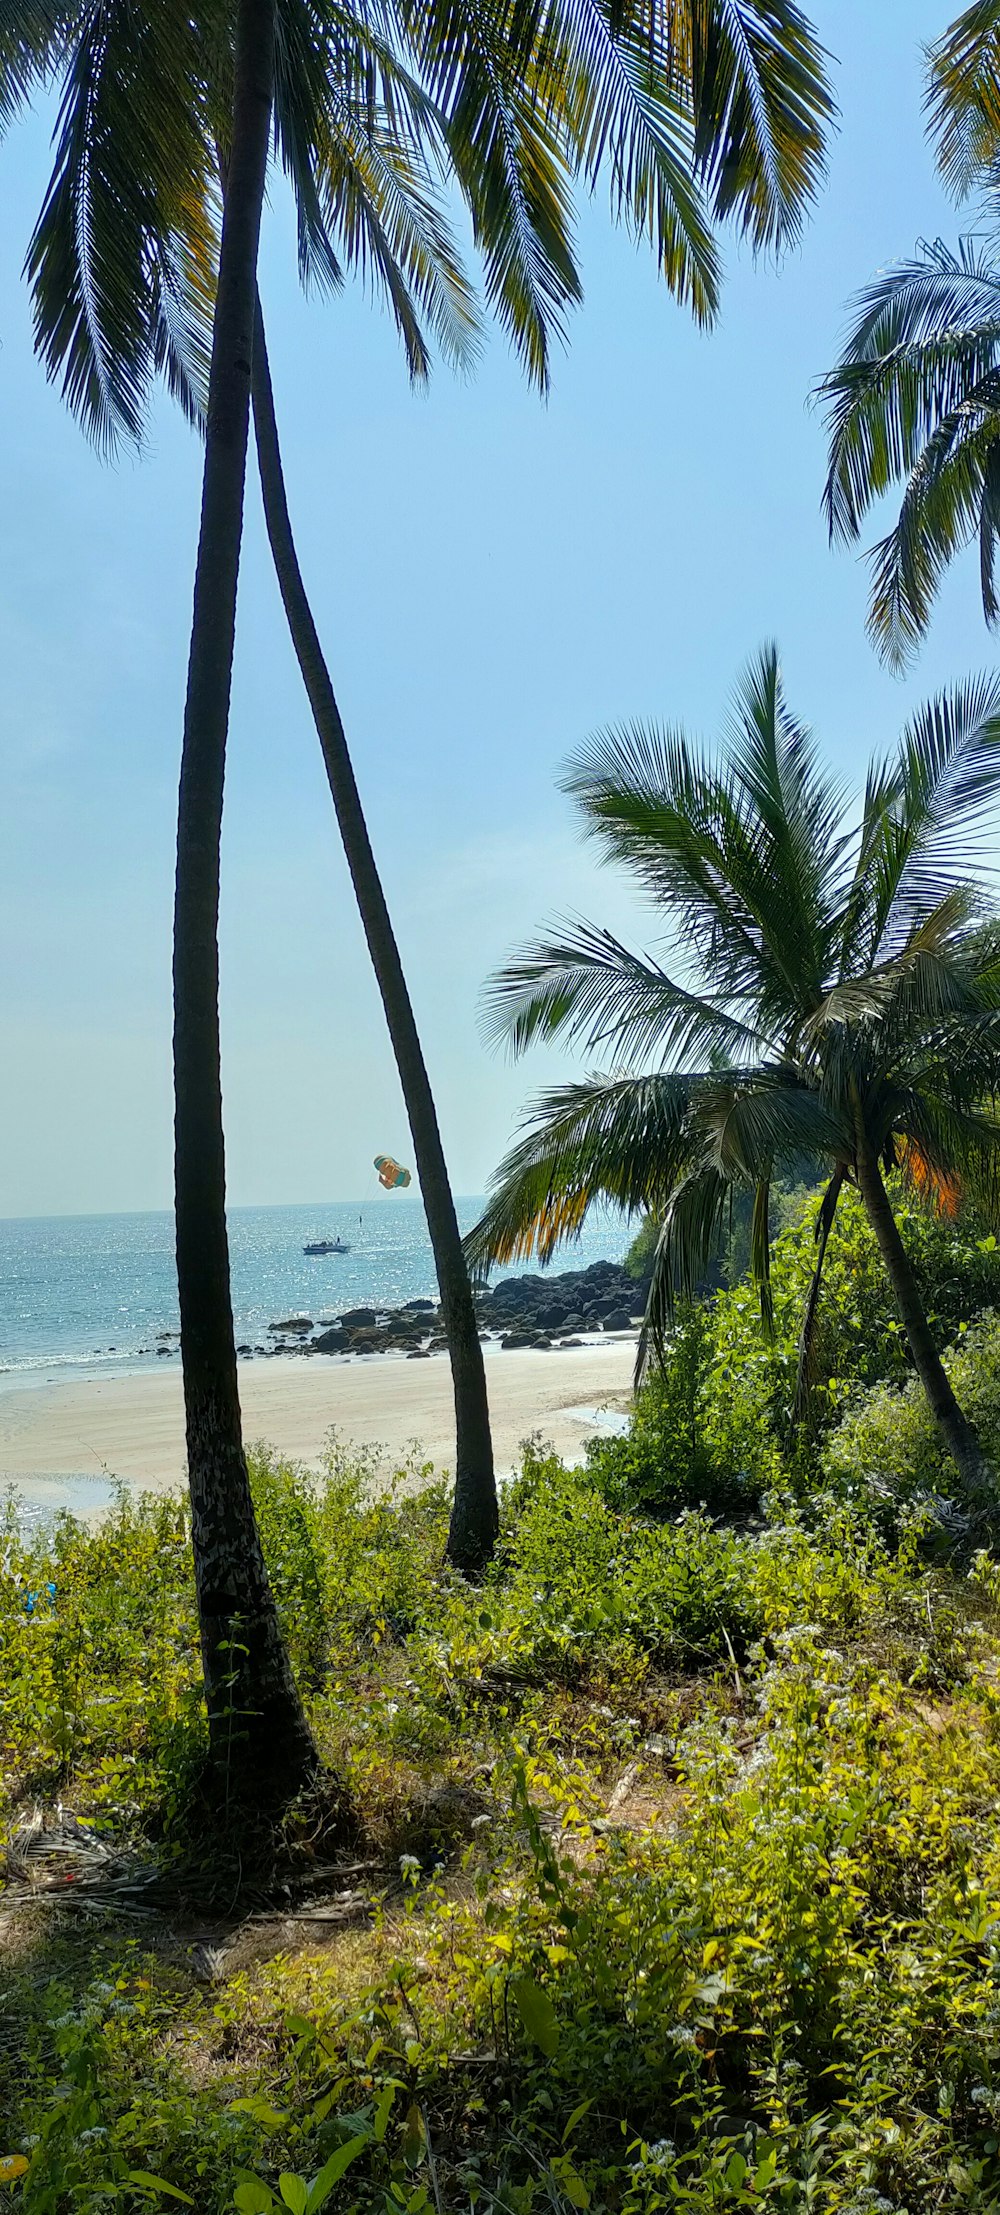 a beach with palm trees and the ocean in the background